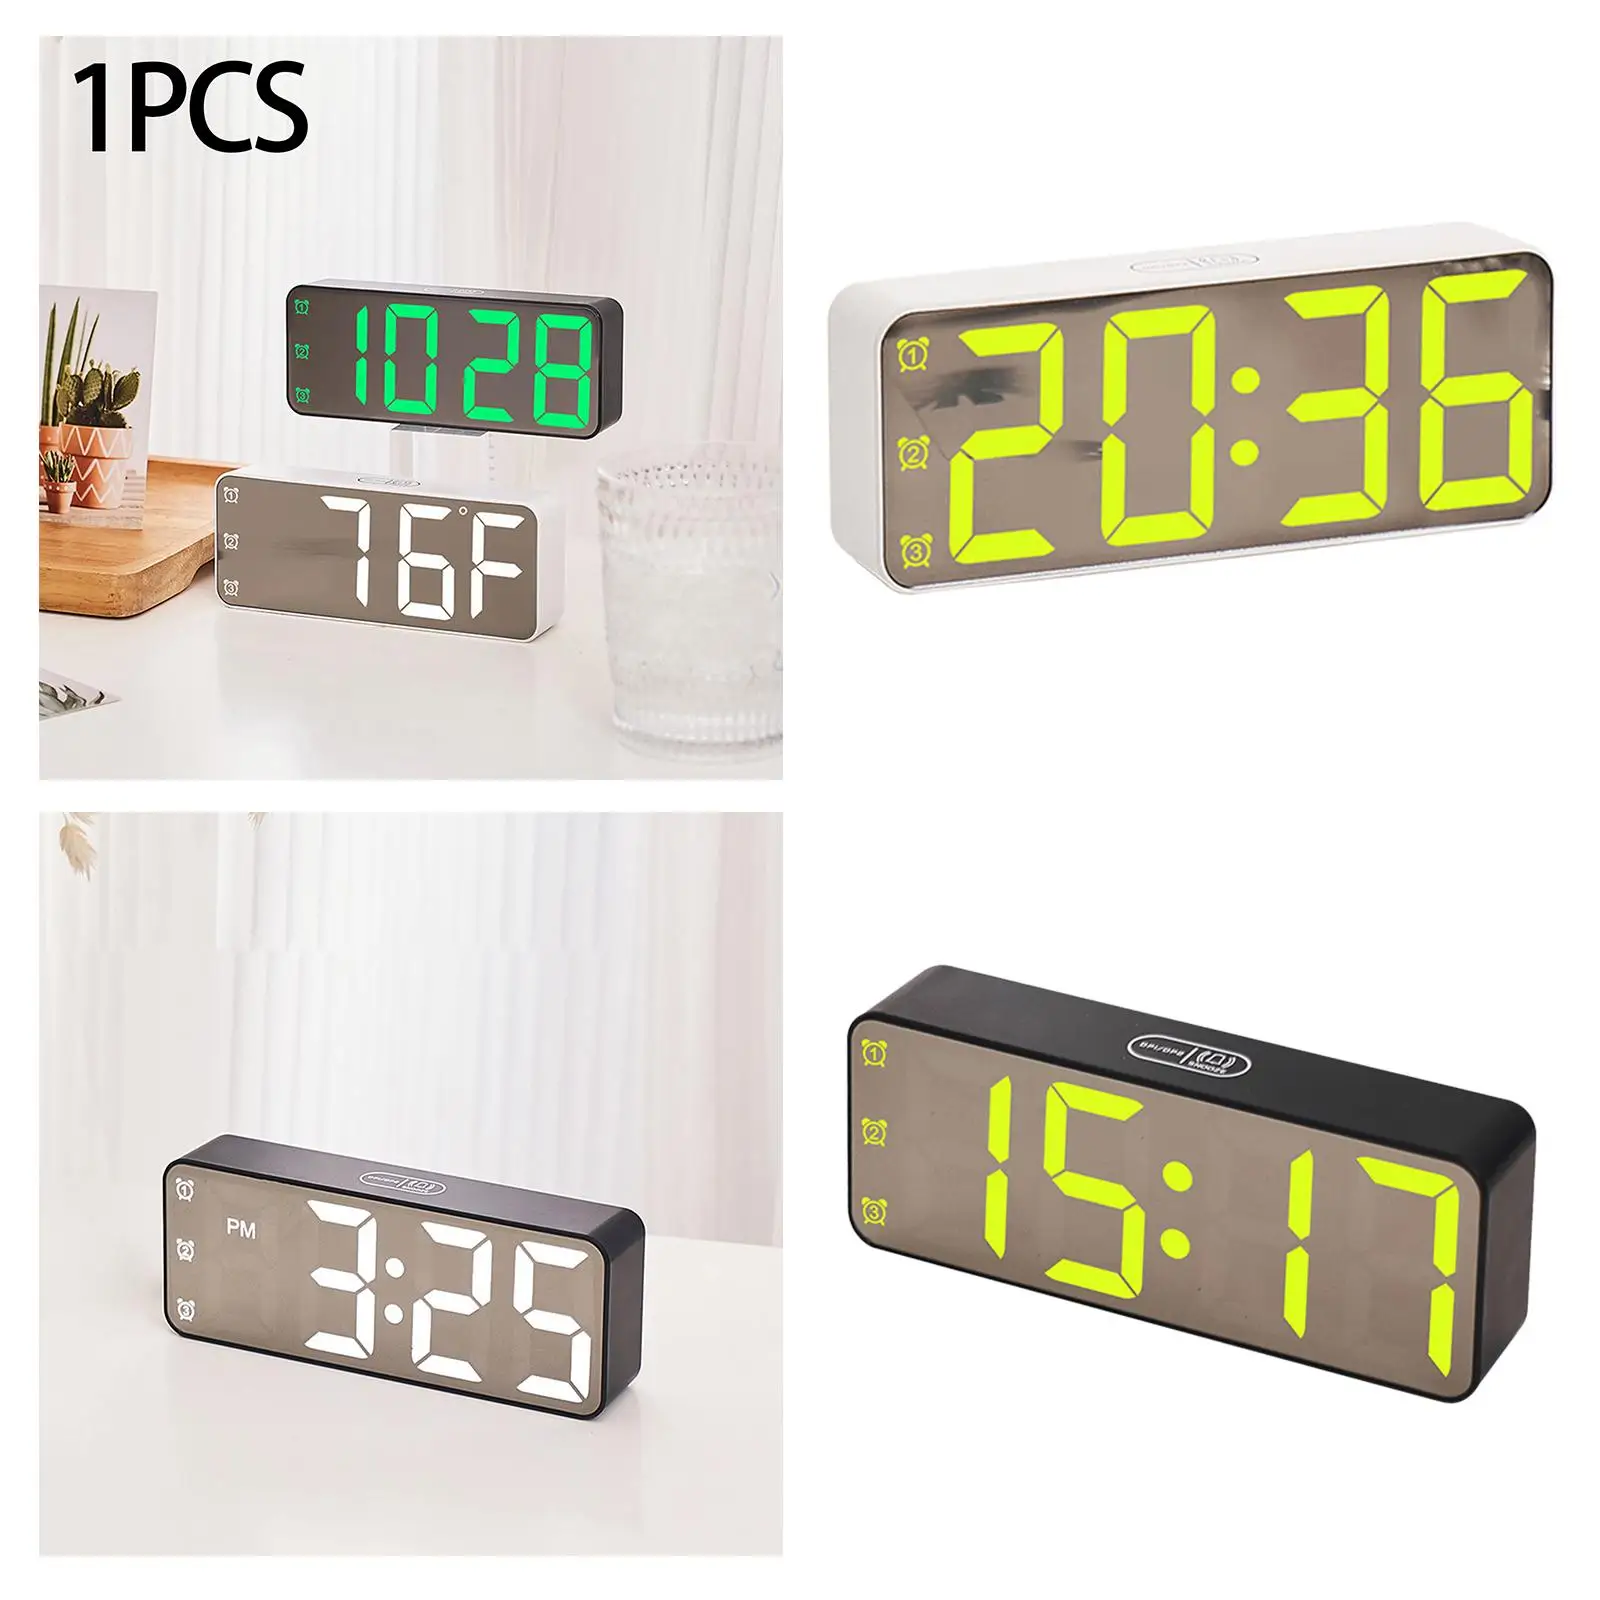 RGB Digital Alarm Clock Multifunctional Snooze Function Electric Mirror Alarm Clock for Office Kitchen Home Dining Room Hotel